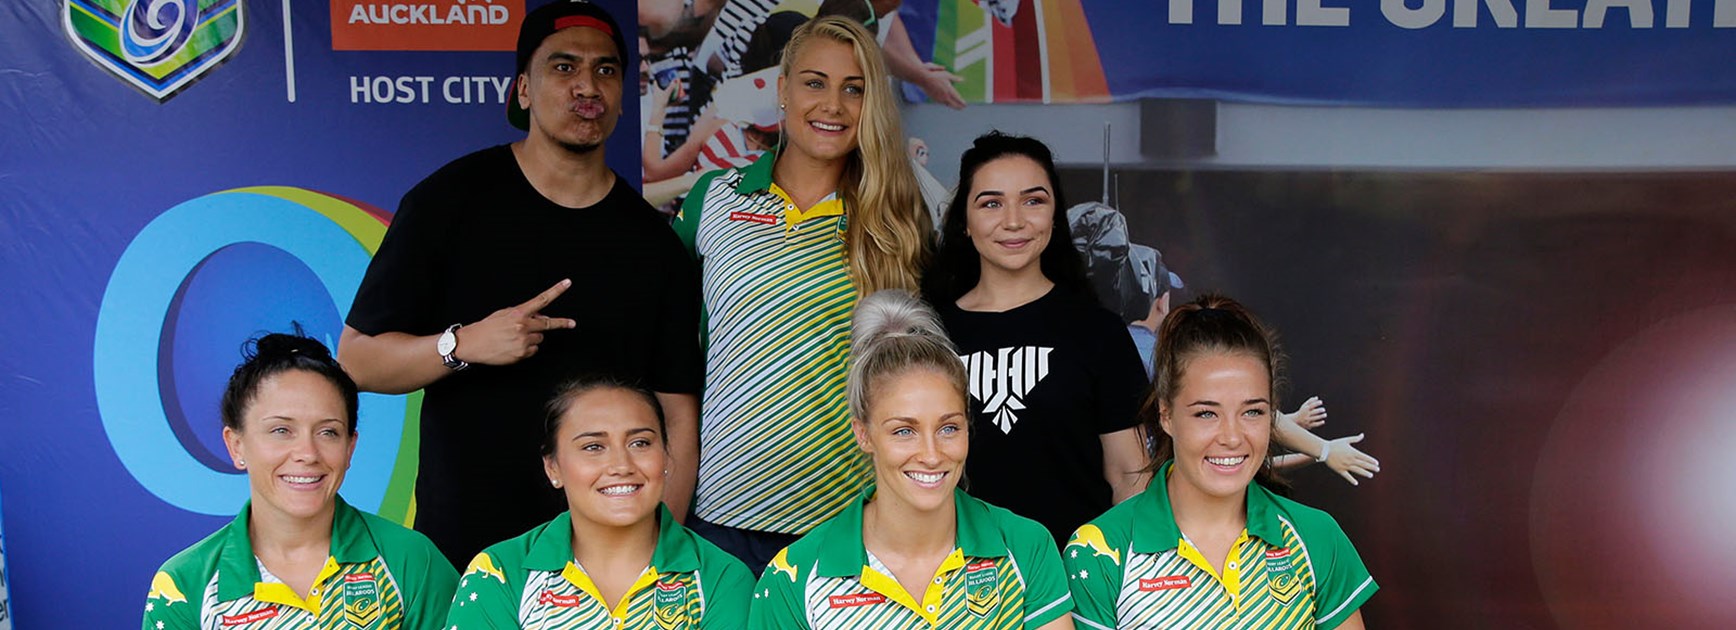 The Jillaroos have some fun at the Downer NRL Auckland Nines fan day.